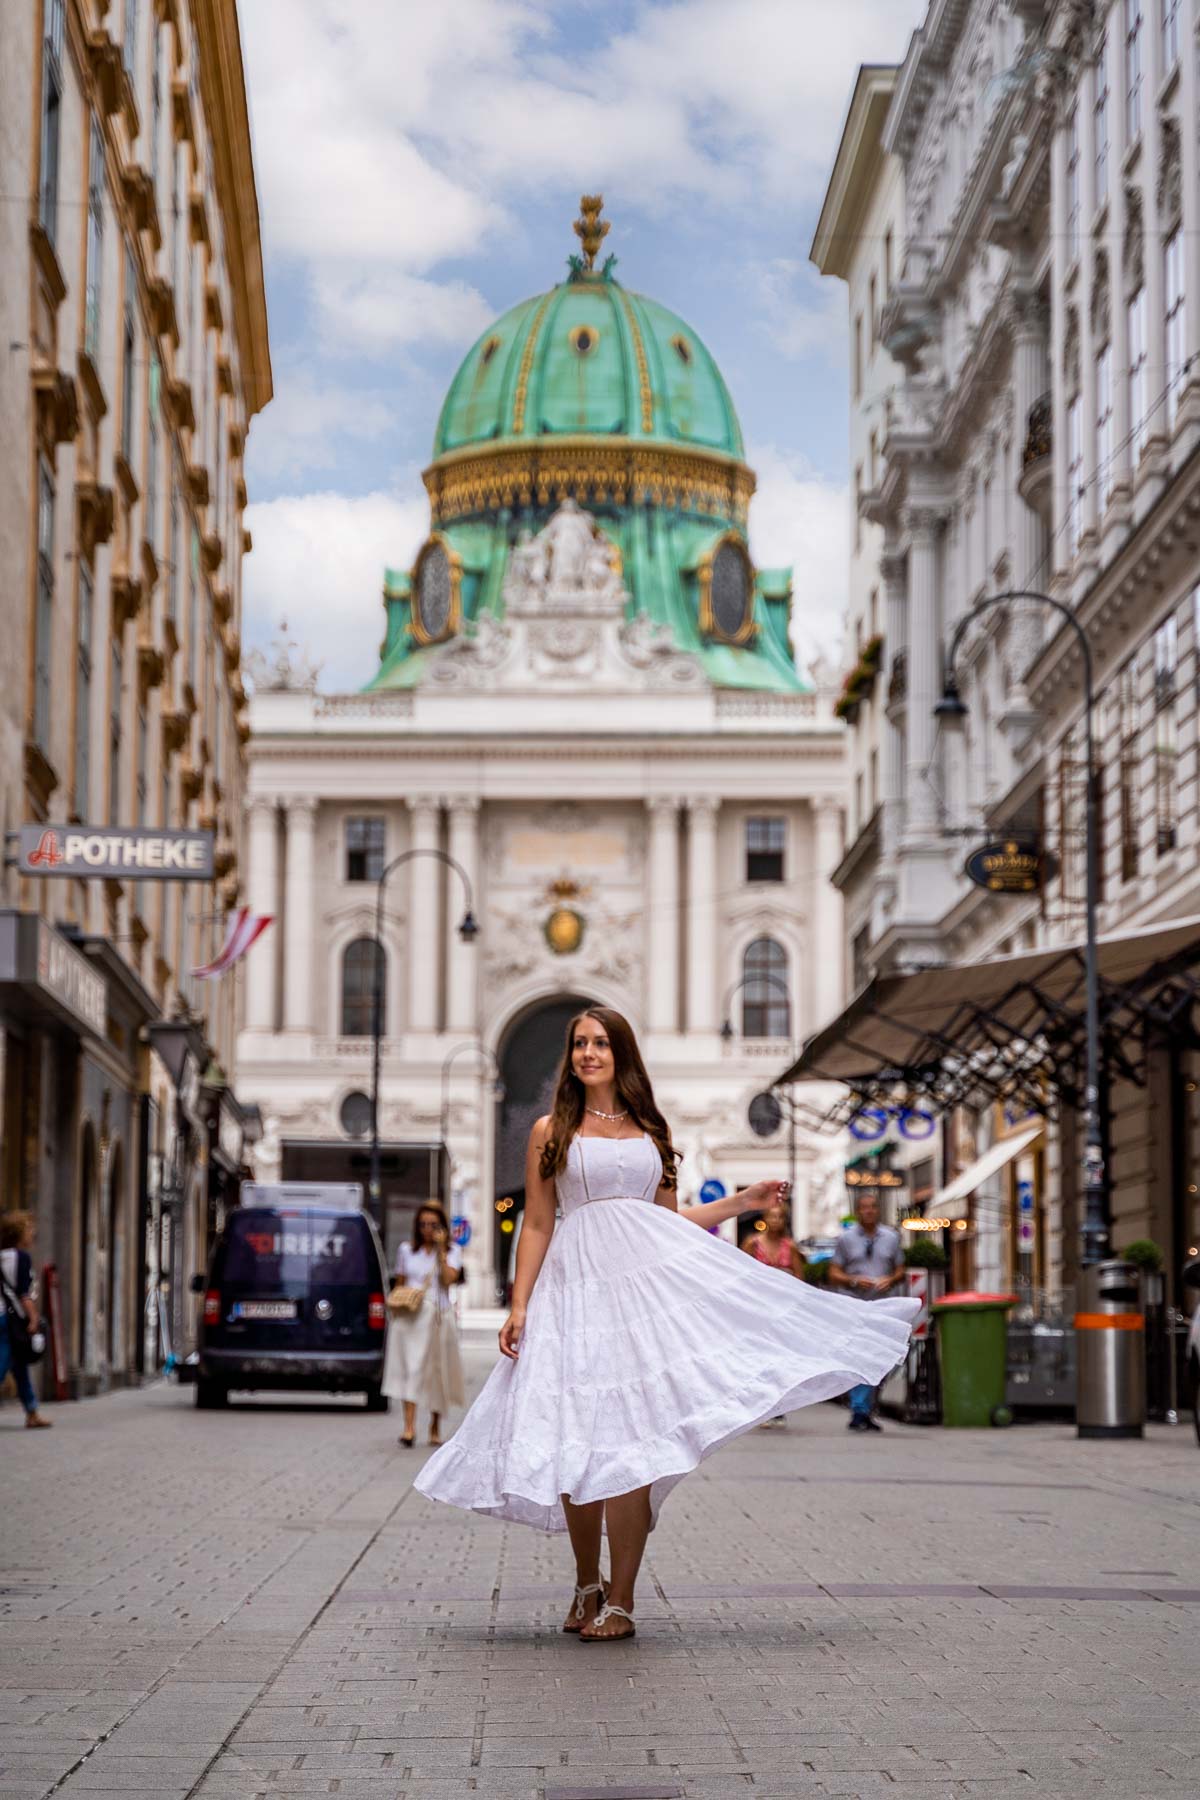 Girl in a white dress with the Hofburg in the background